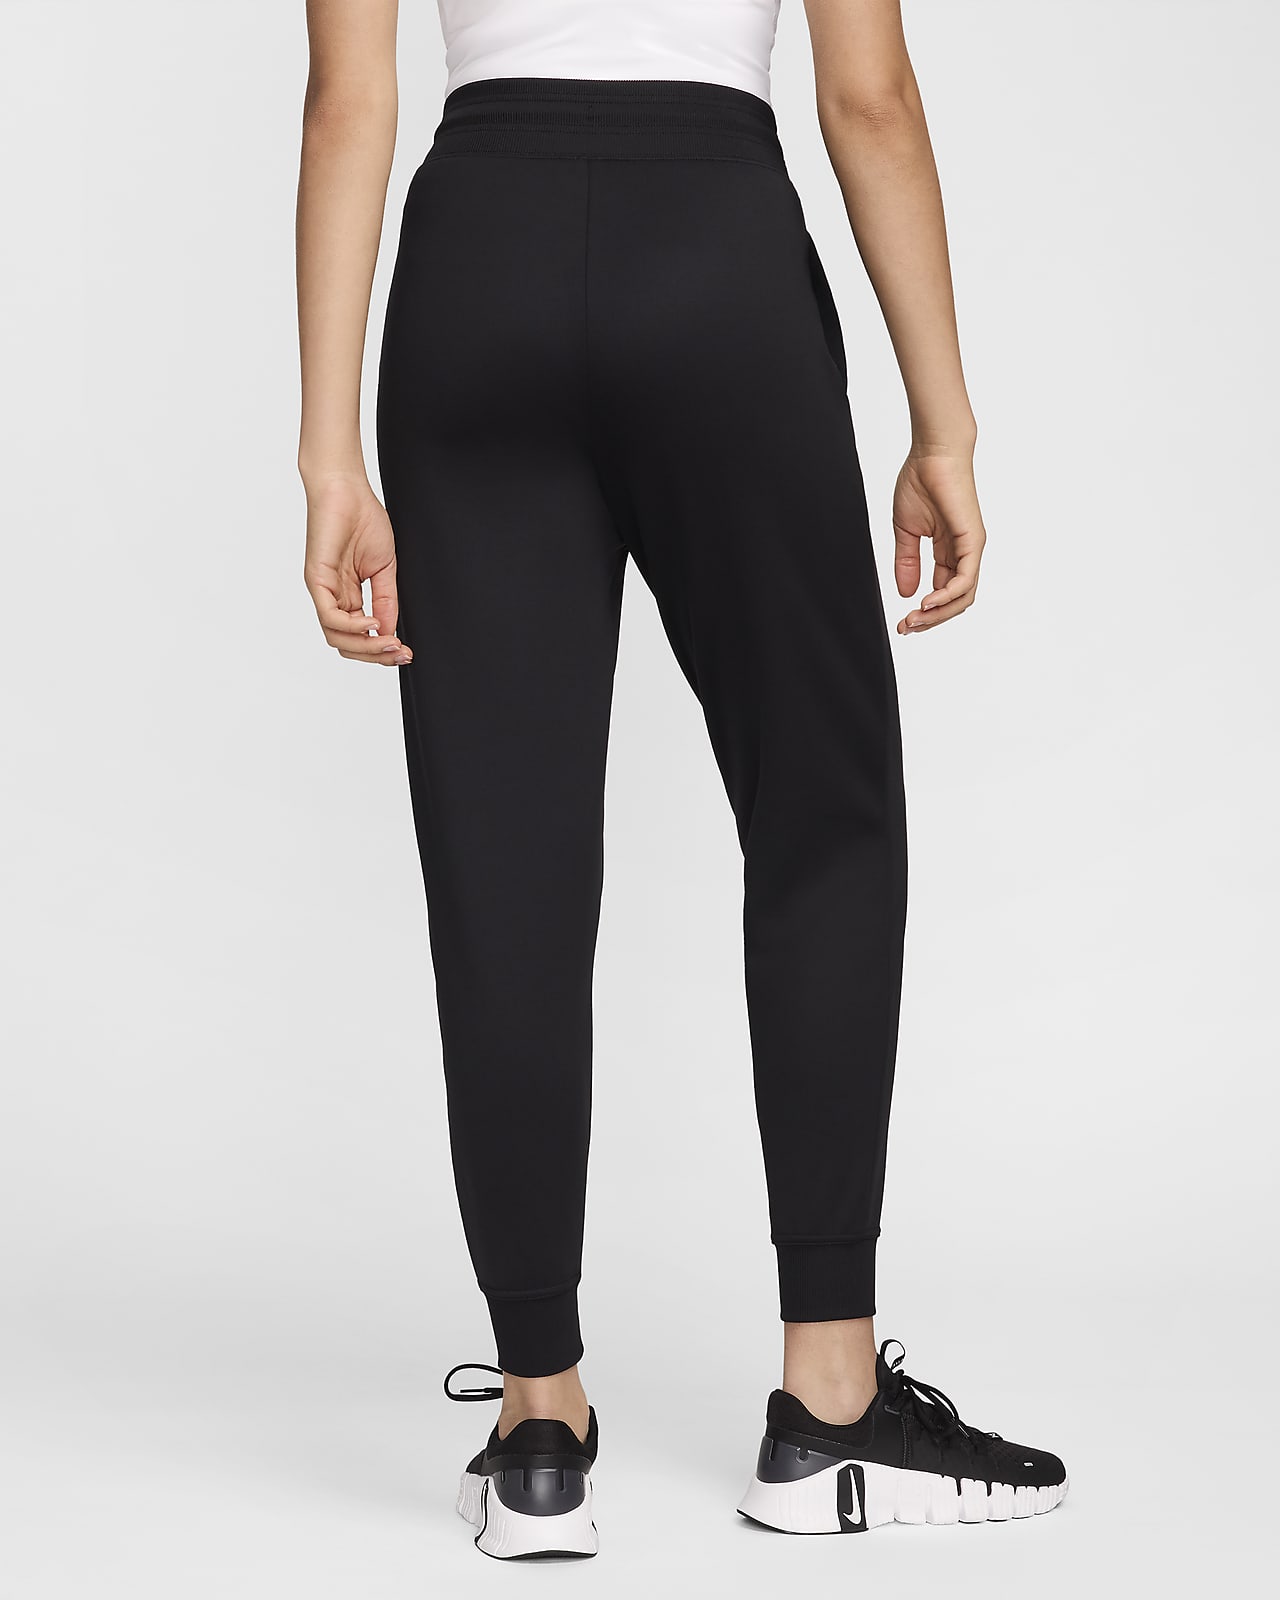 Buy Nike Women's Pro Therma-FIT ADV High-Waisted Leggings Black in